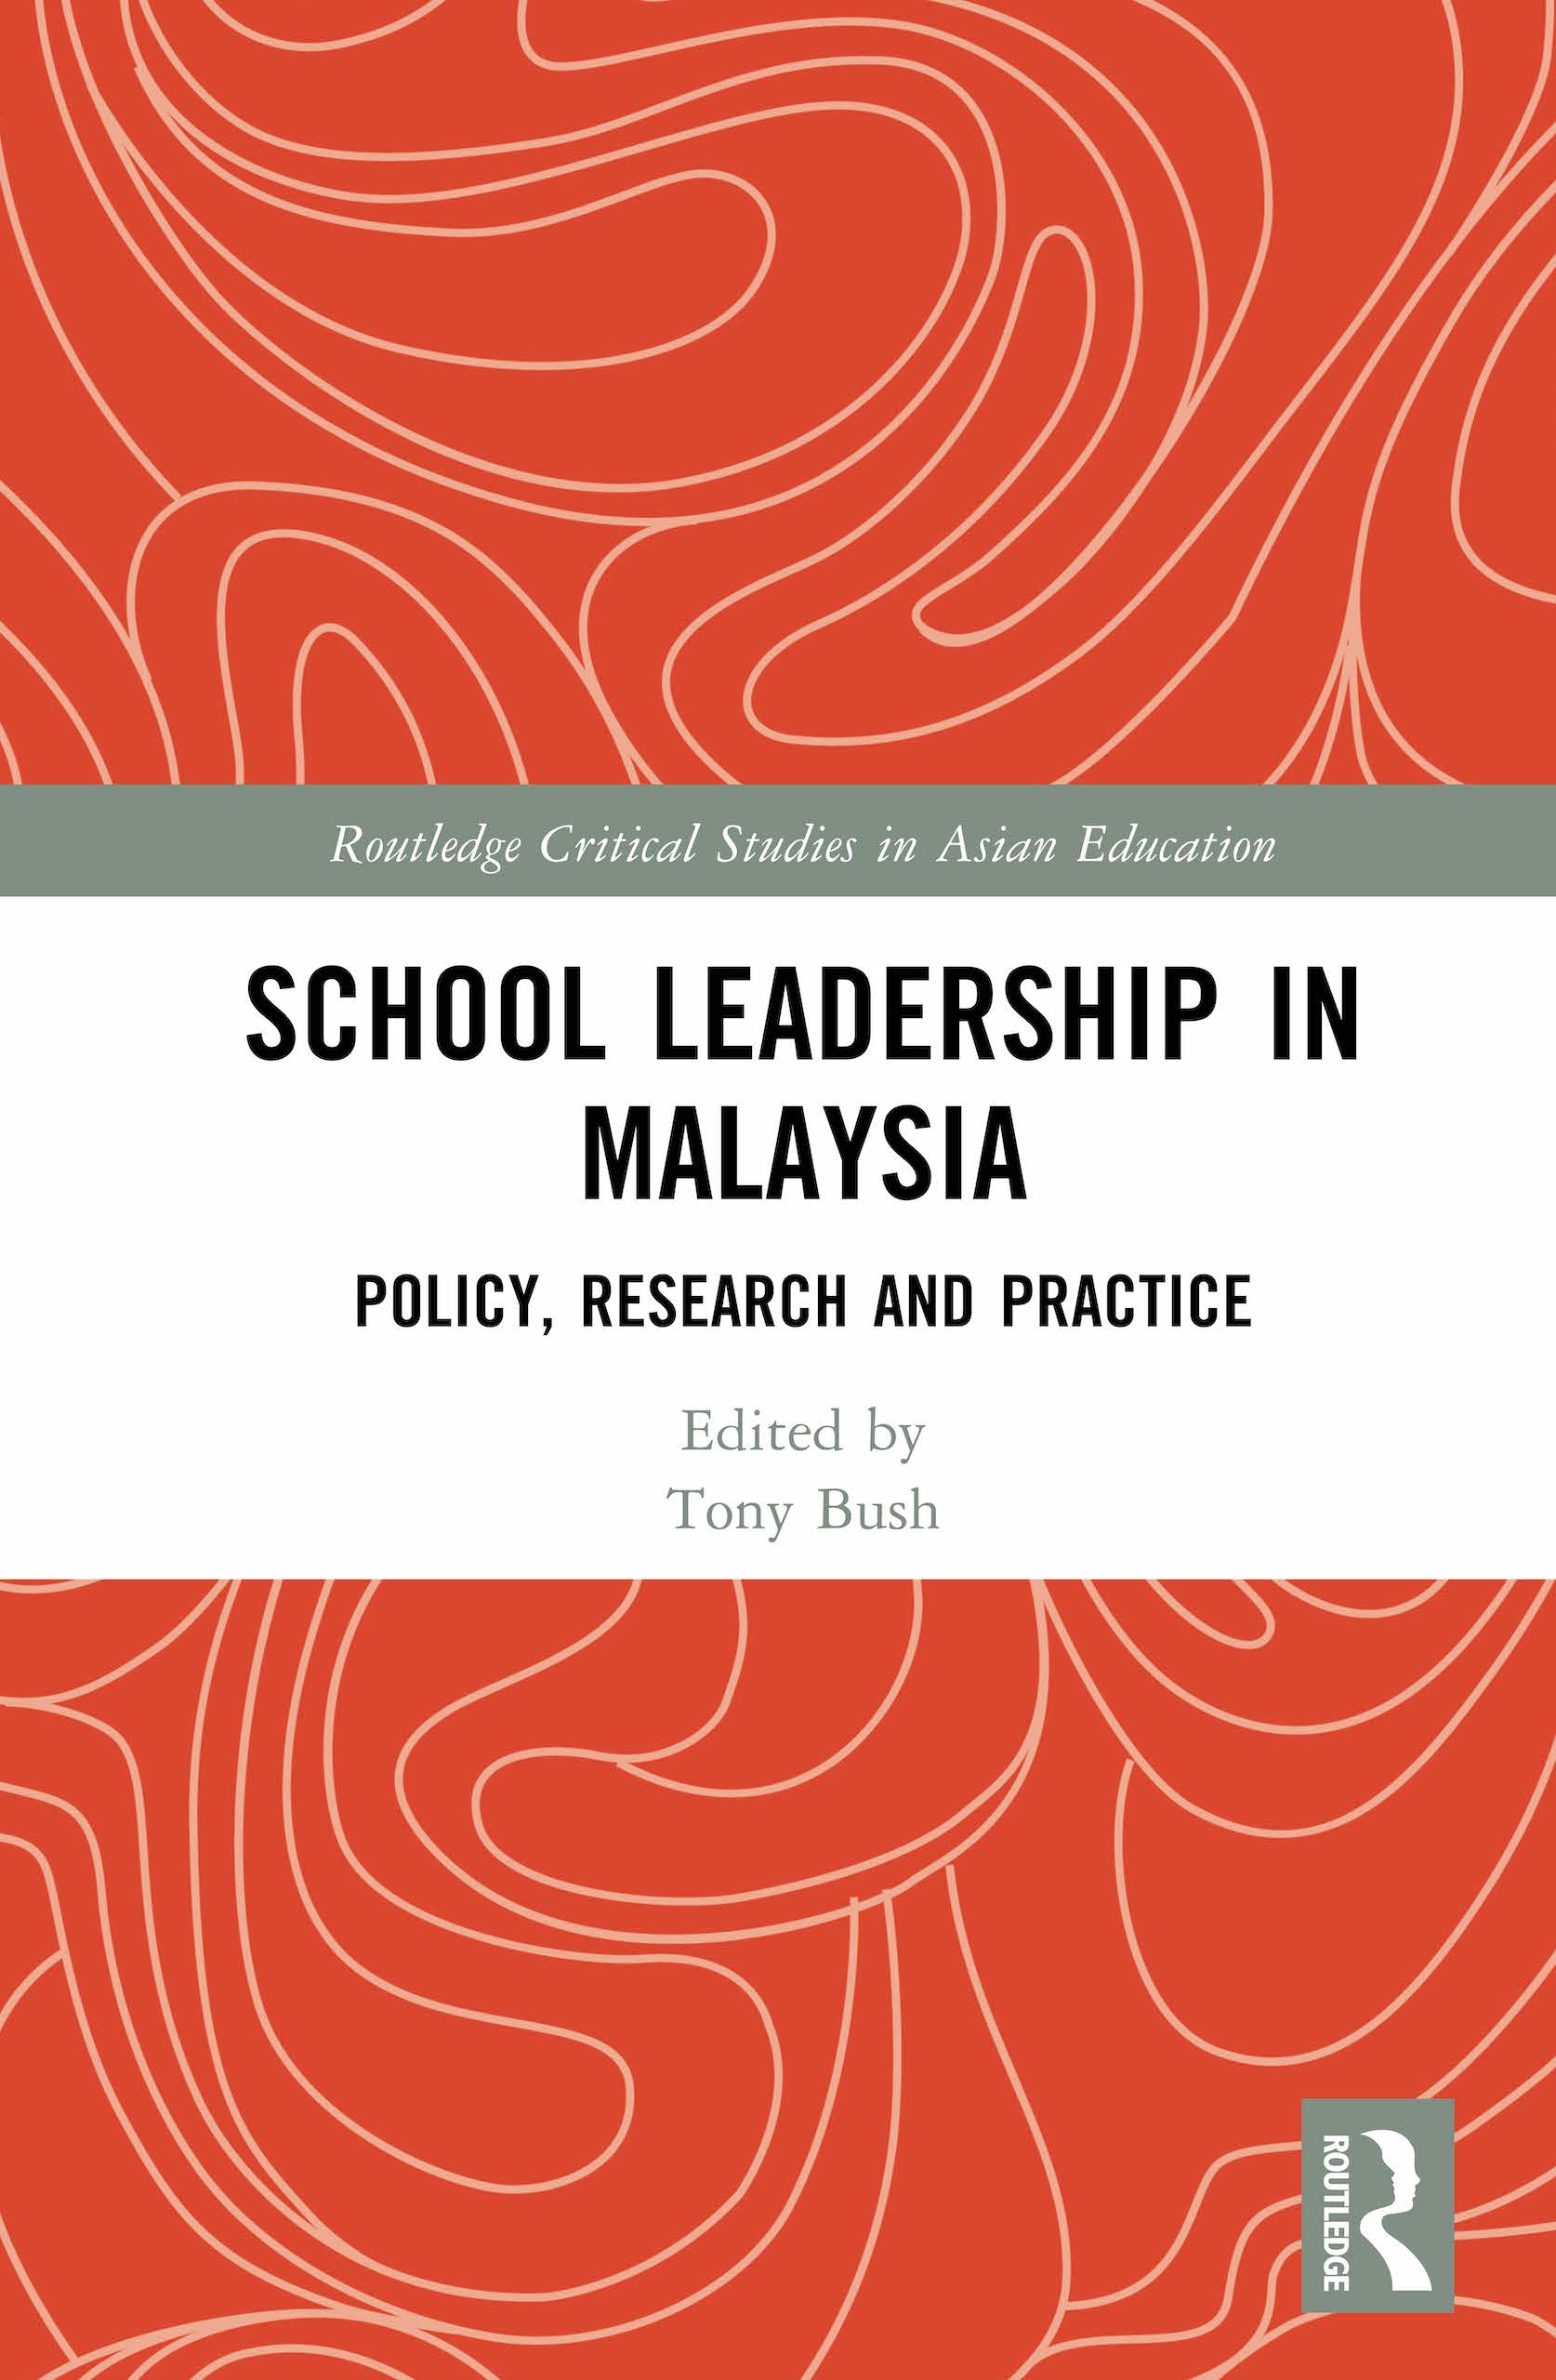 Routledge_School Leadership in Malaysia-scaled